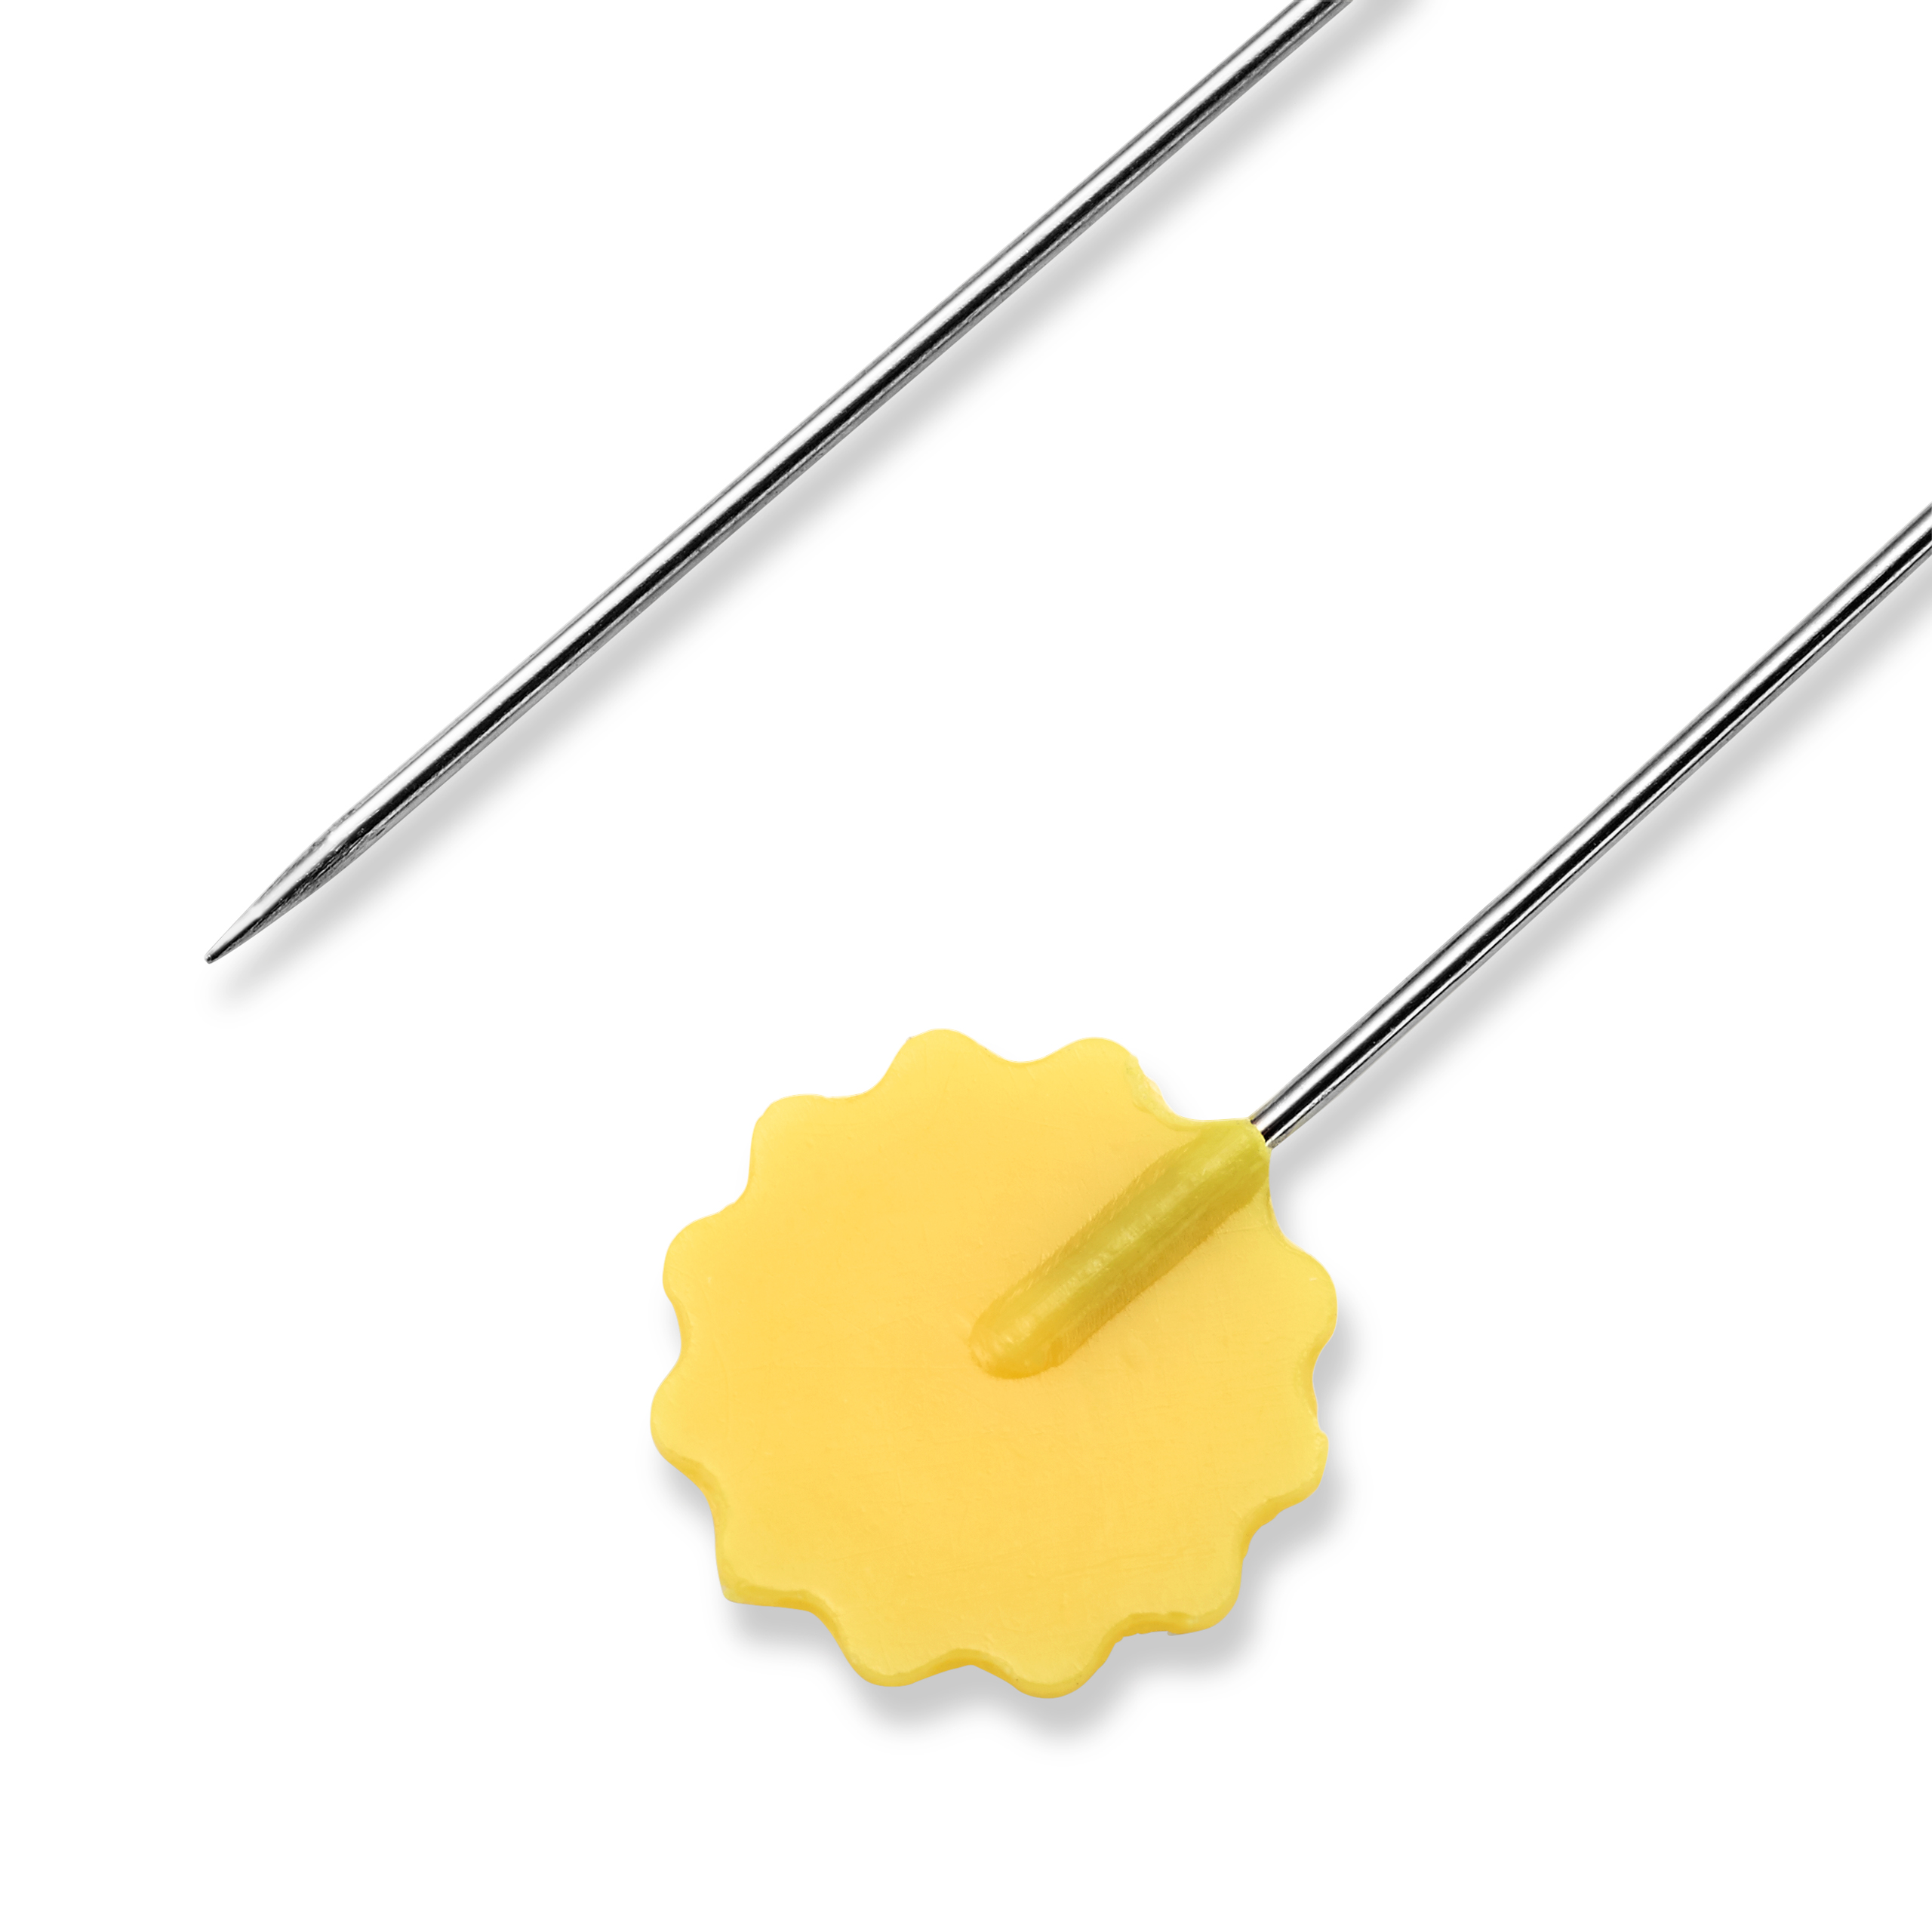 Quilter's Flat Flower Pins silver col / yellow  0.60 x 50 mm, 50 St